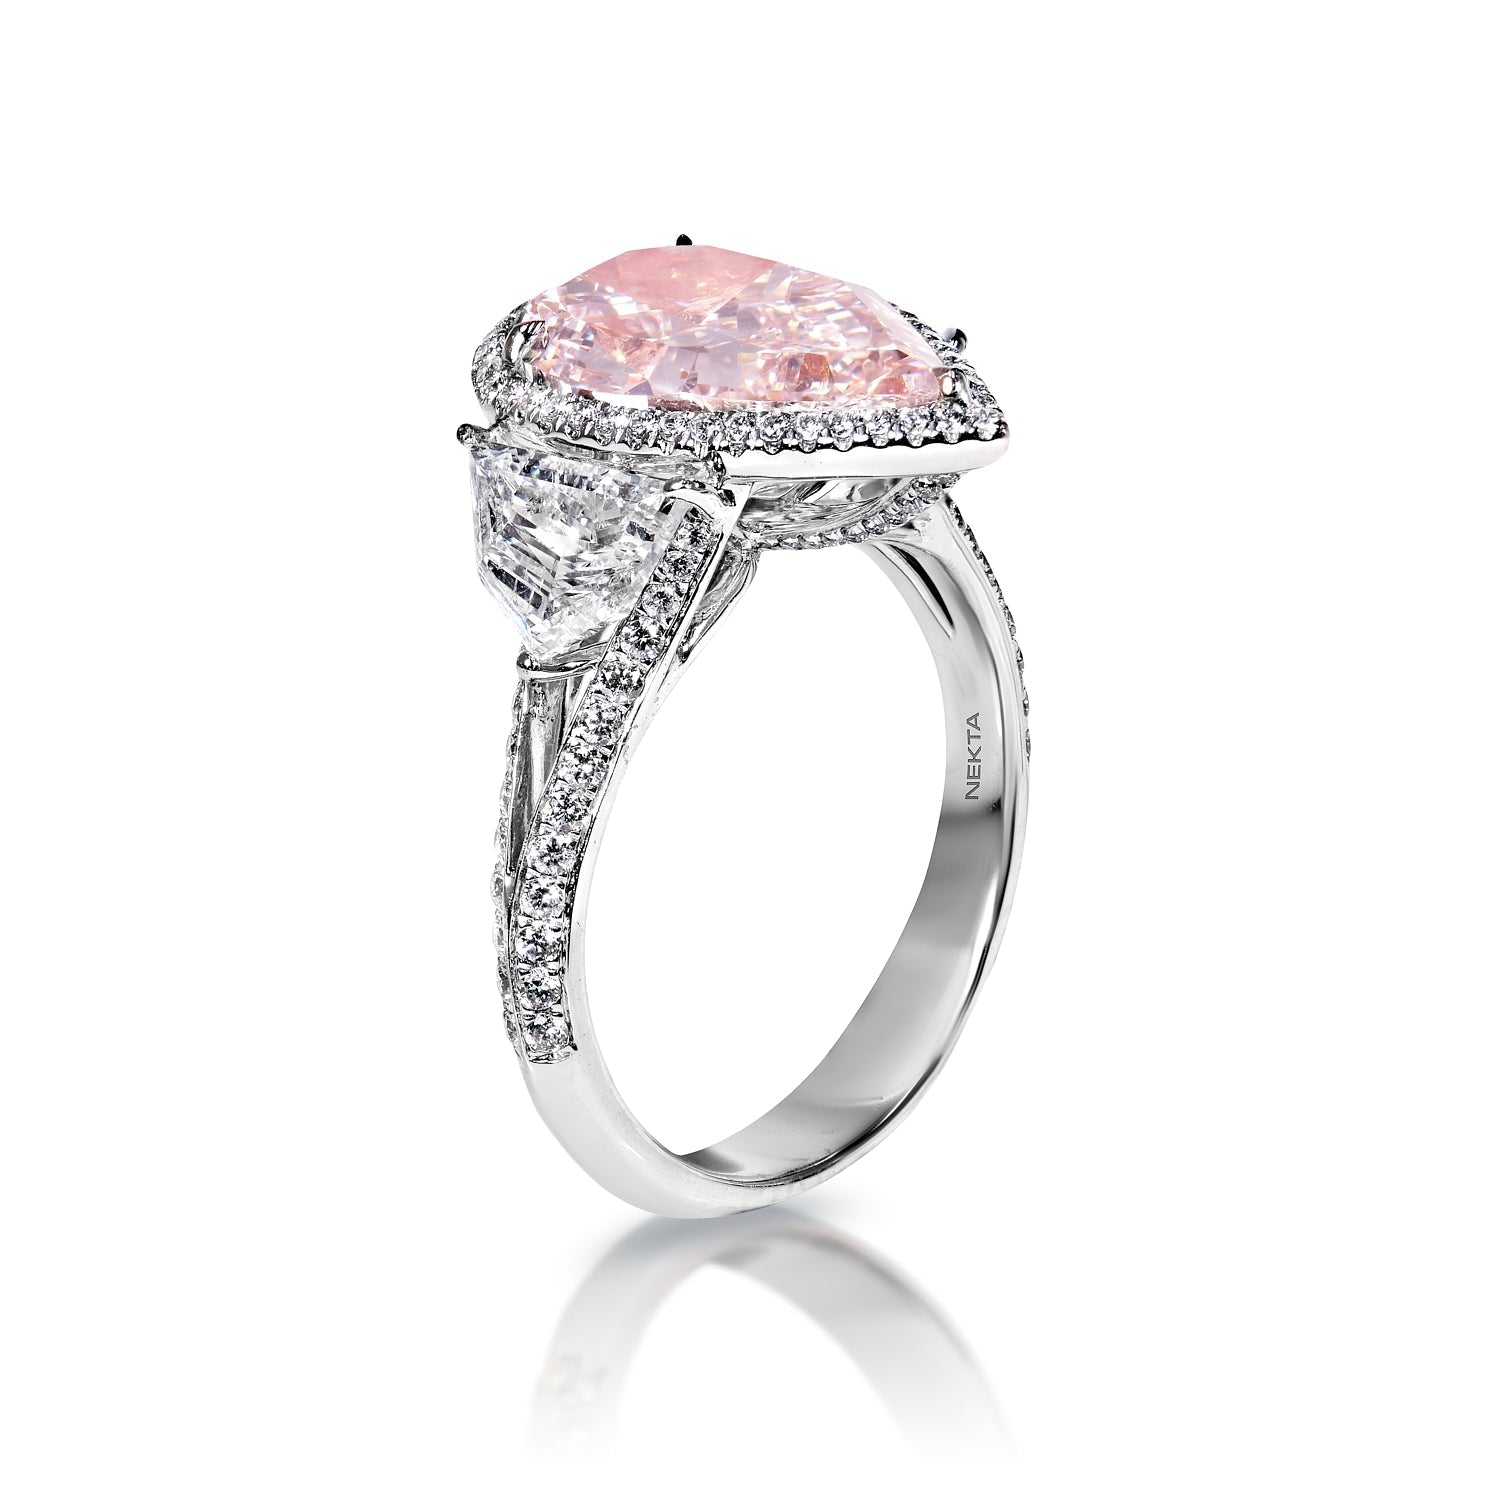 Ximena 5 Carat Light Pink VS2 Pear Shape Diamond Engagement Ring in 18k White Gold Side View